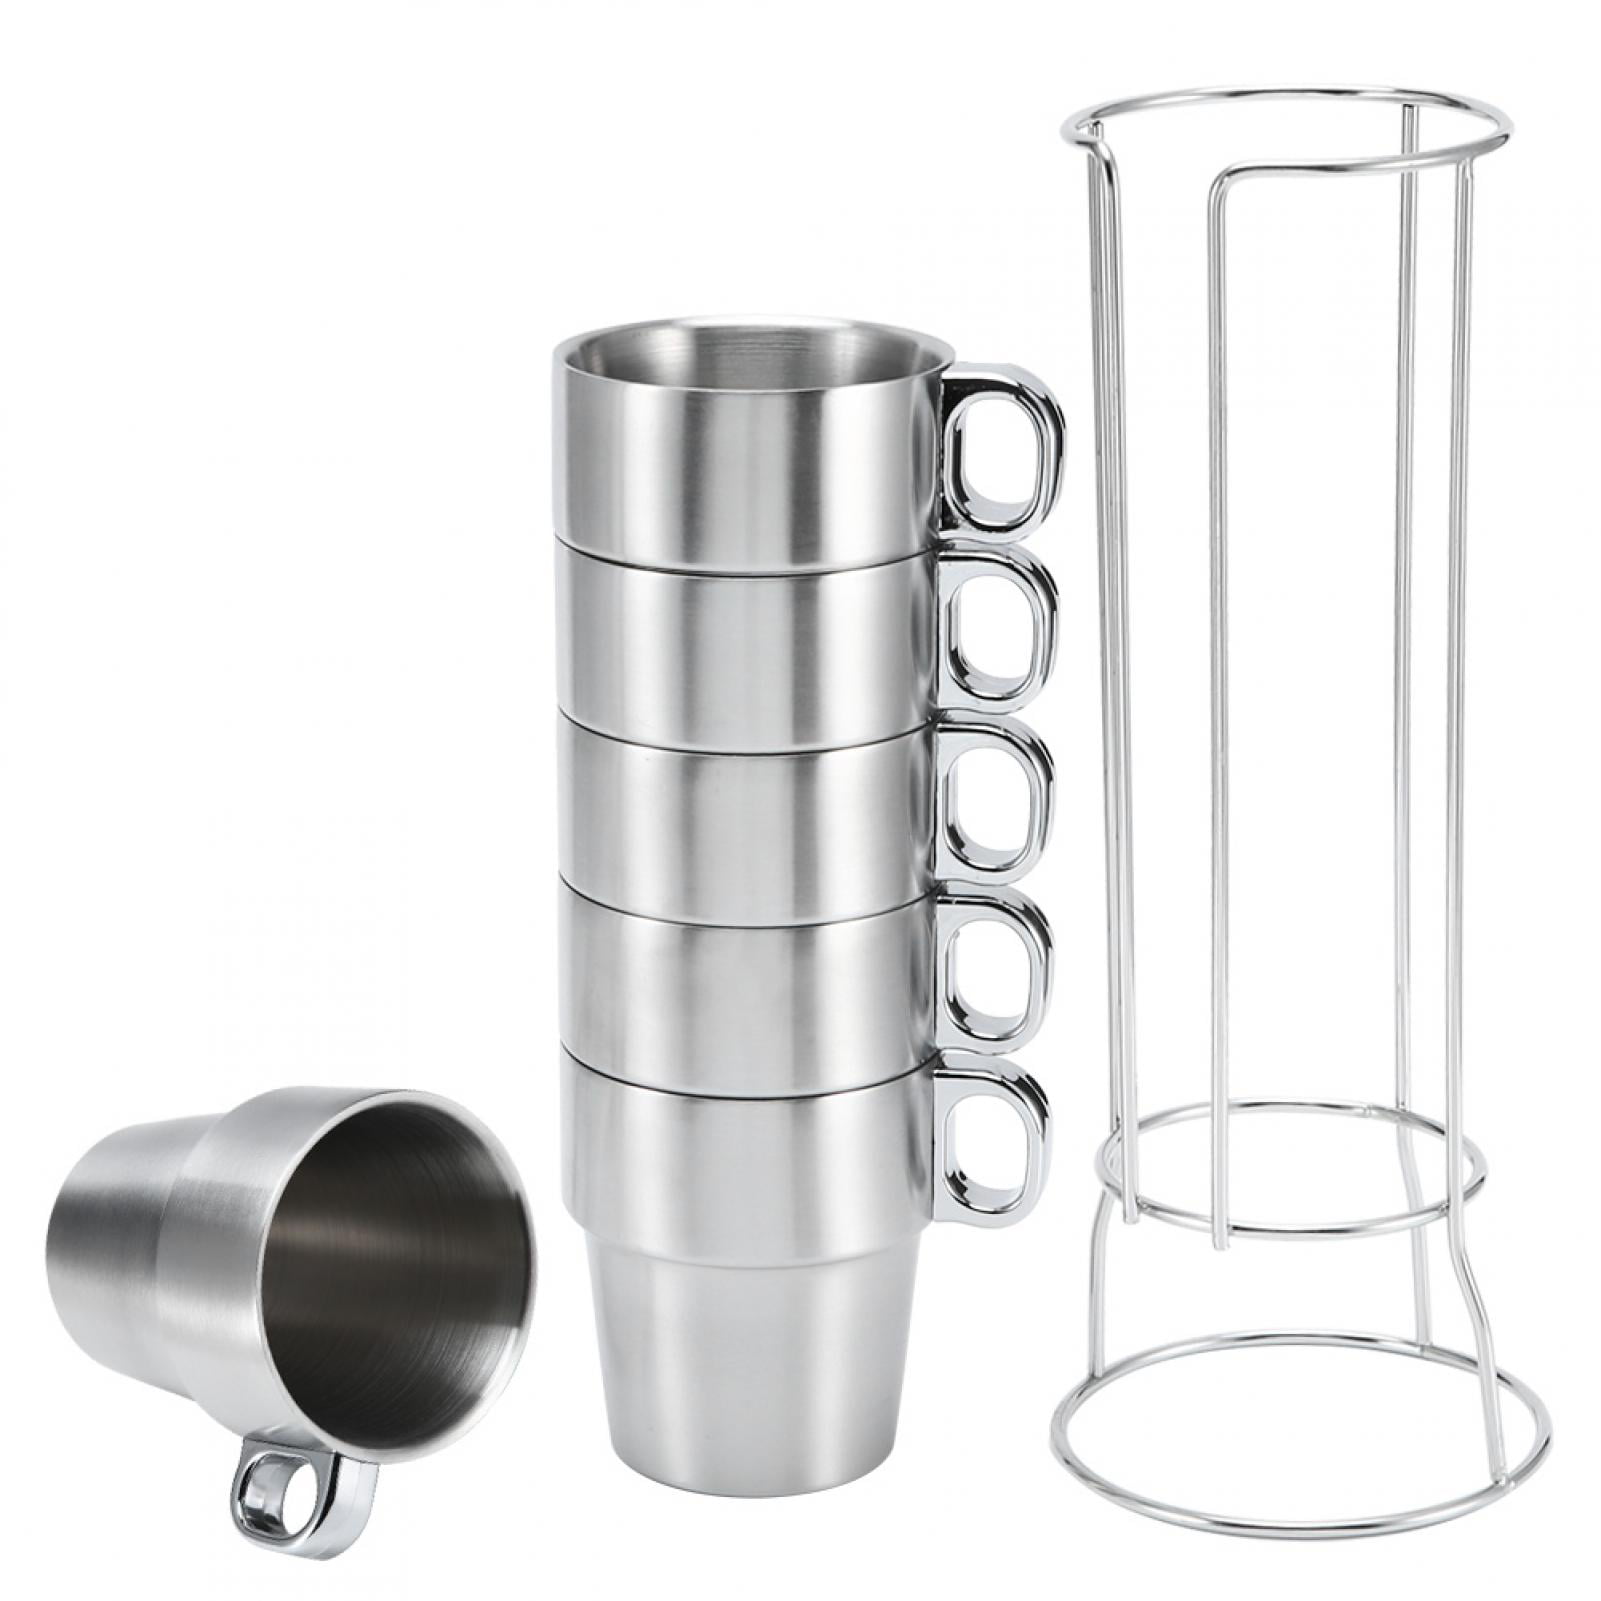 Stackable Mugs Tower Cup Set Stainless Steel Tea Cups with Stand Holder Rack 